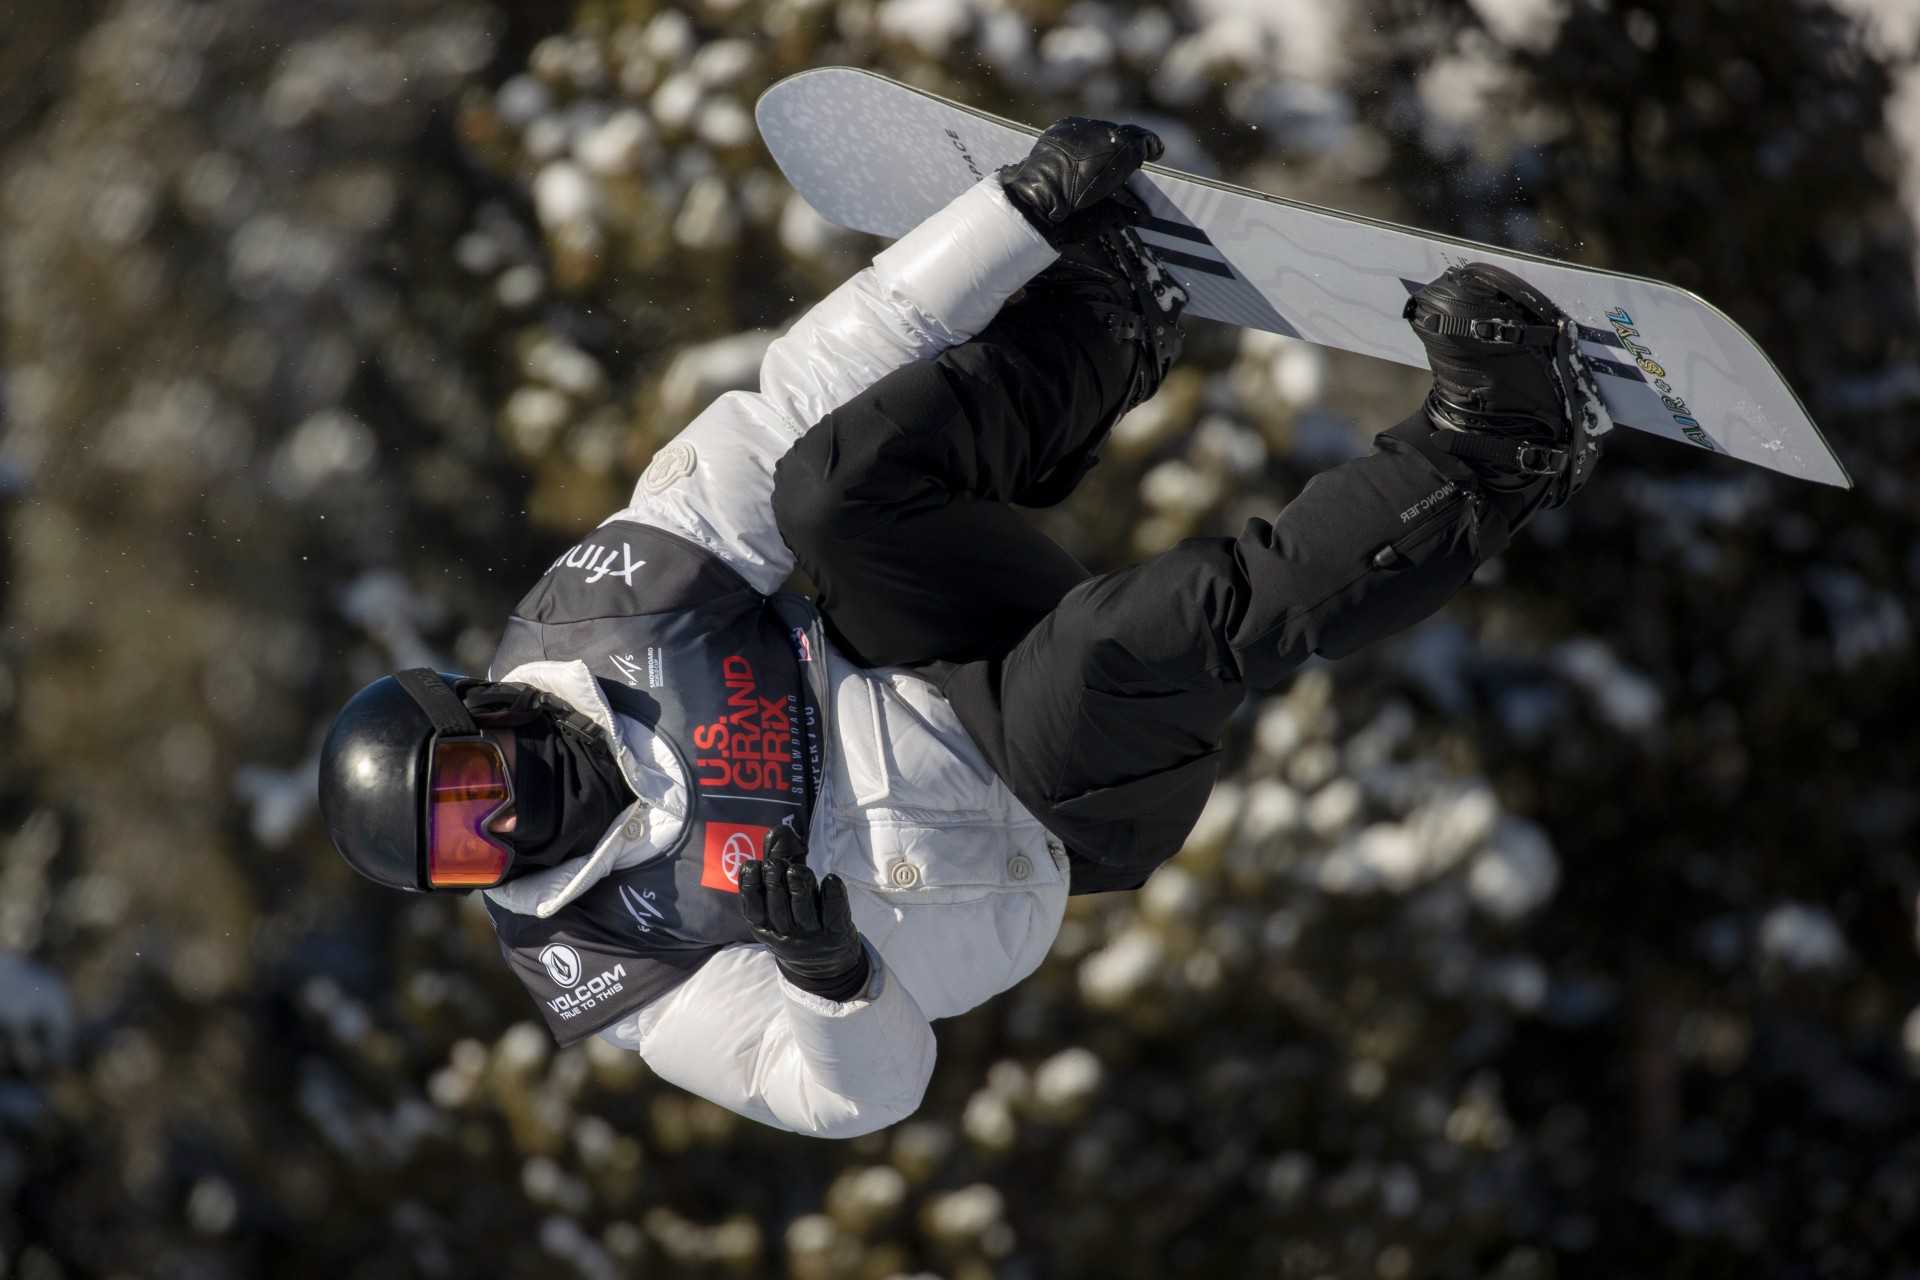 Team USA  Shaun White, Now The Elder Statesman, Embracing The Journey To A  Fifth Olympics